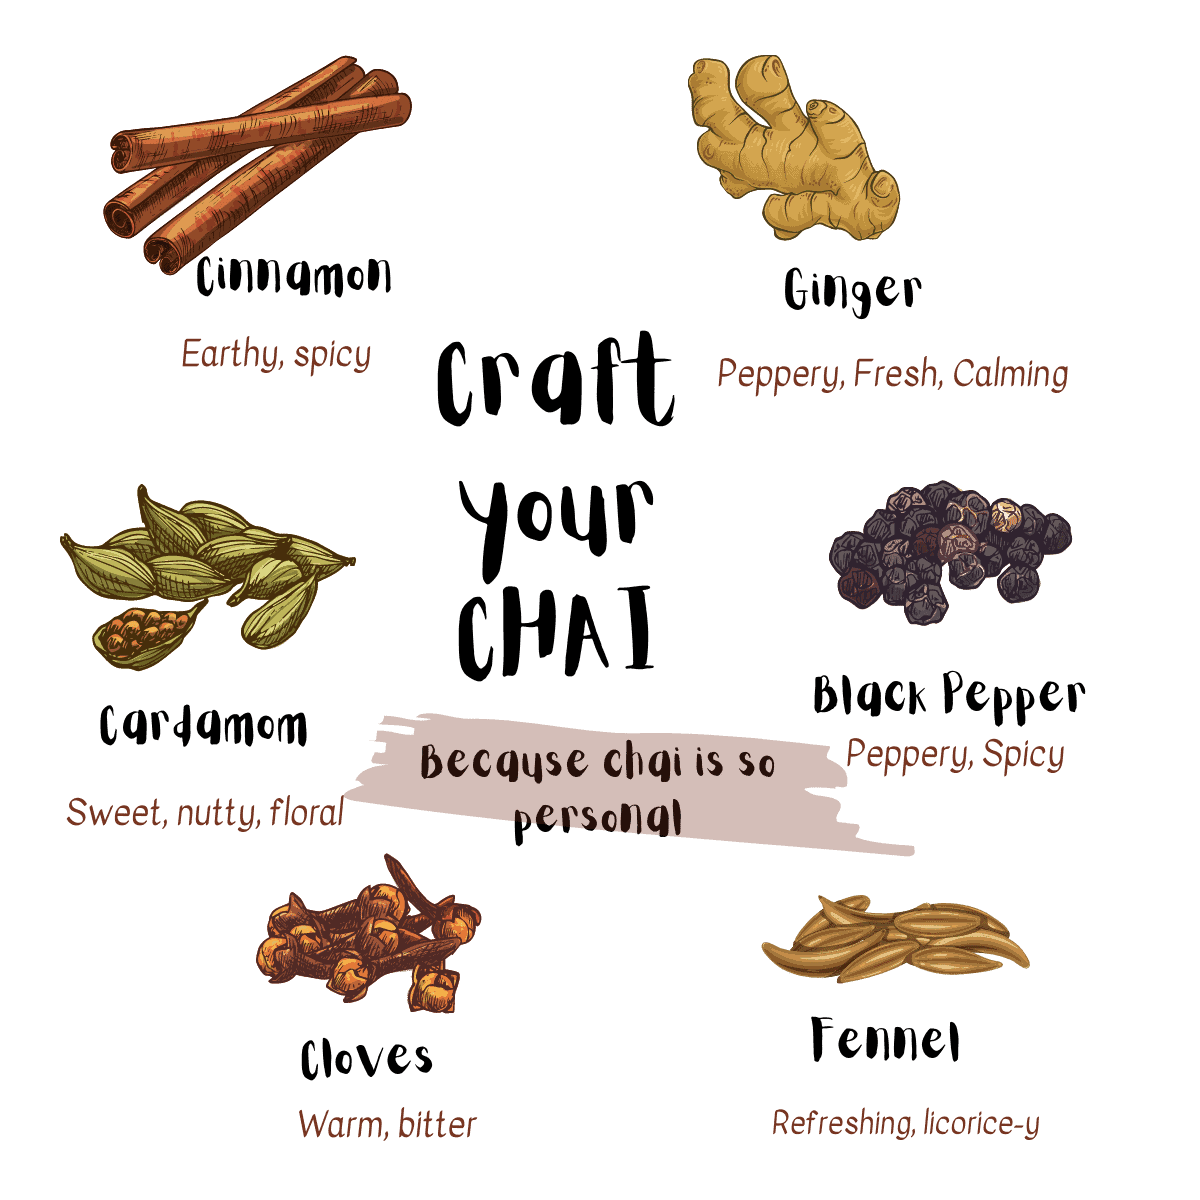 Infographic with pictures of spices along with their flavor profile